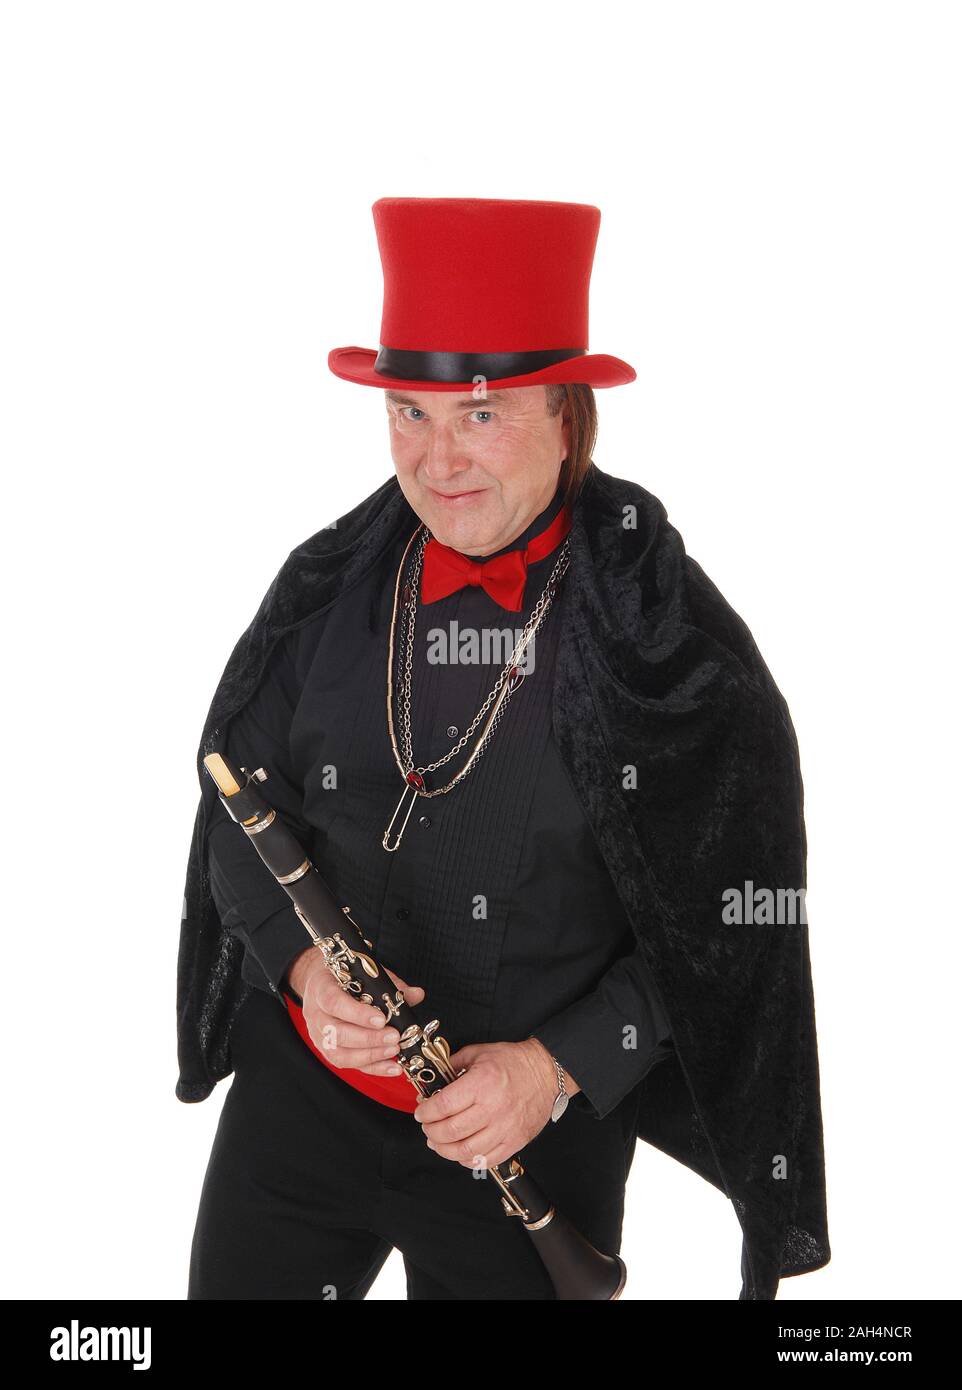 A middle age indigenous man holding his clarinet in a black outfit and red hat and bow tie looking at camera, isolated for white background Stock Photo